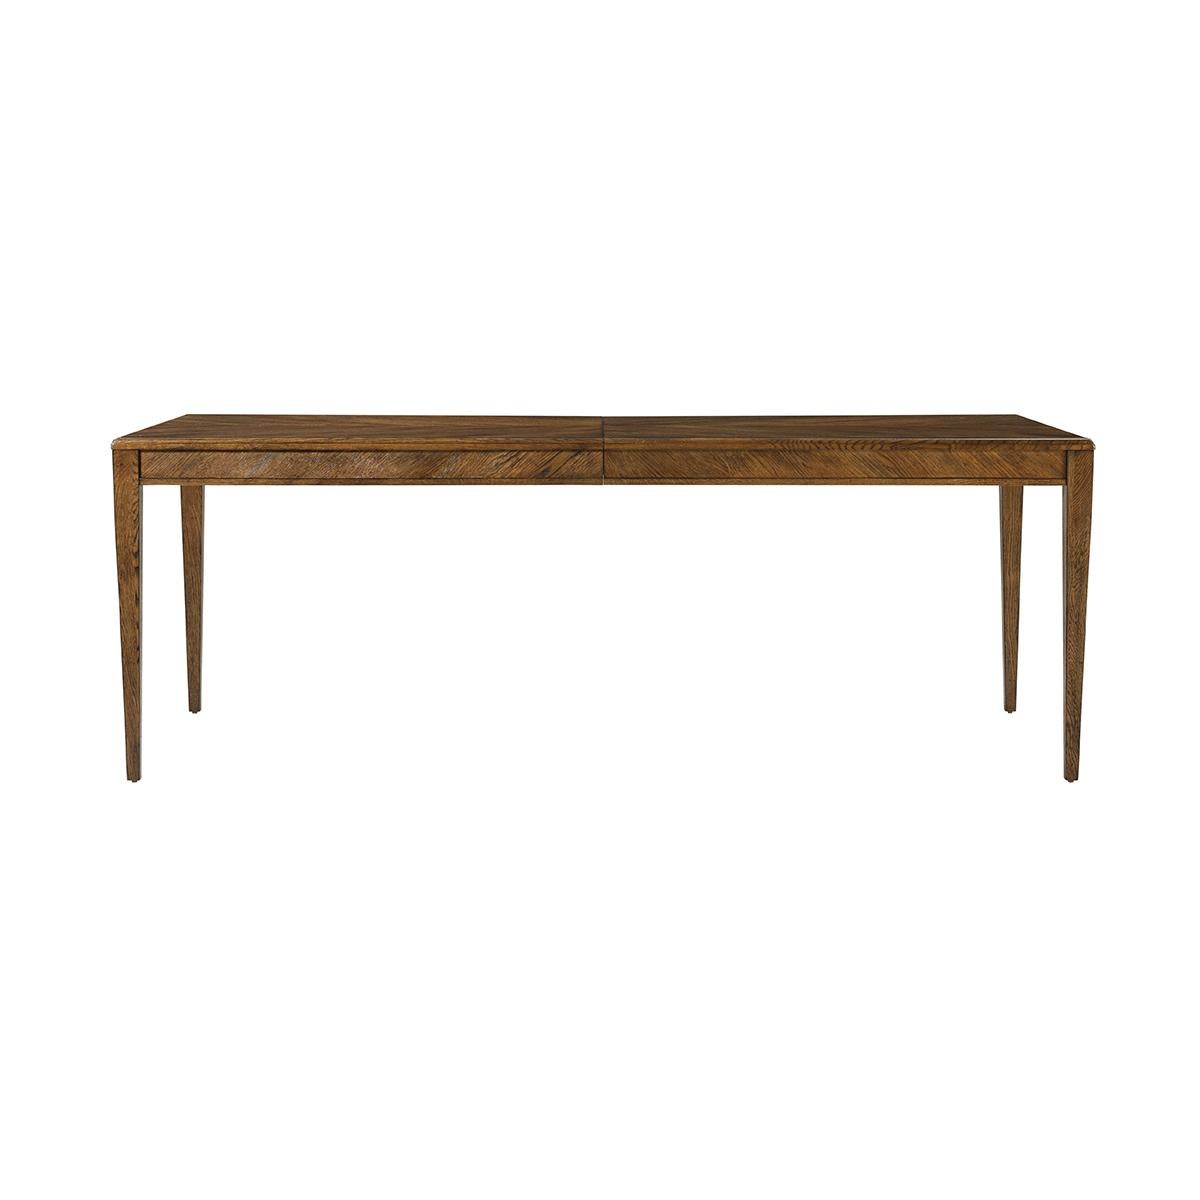 Rustic Oak Parquetry Extension Dining Table For Sale